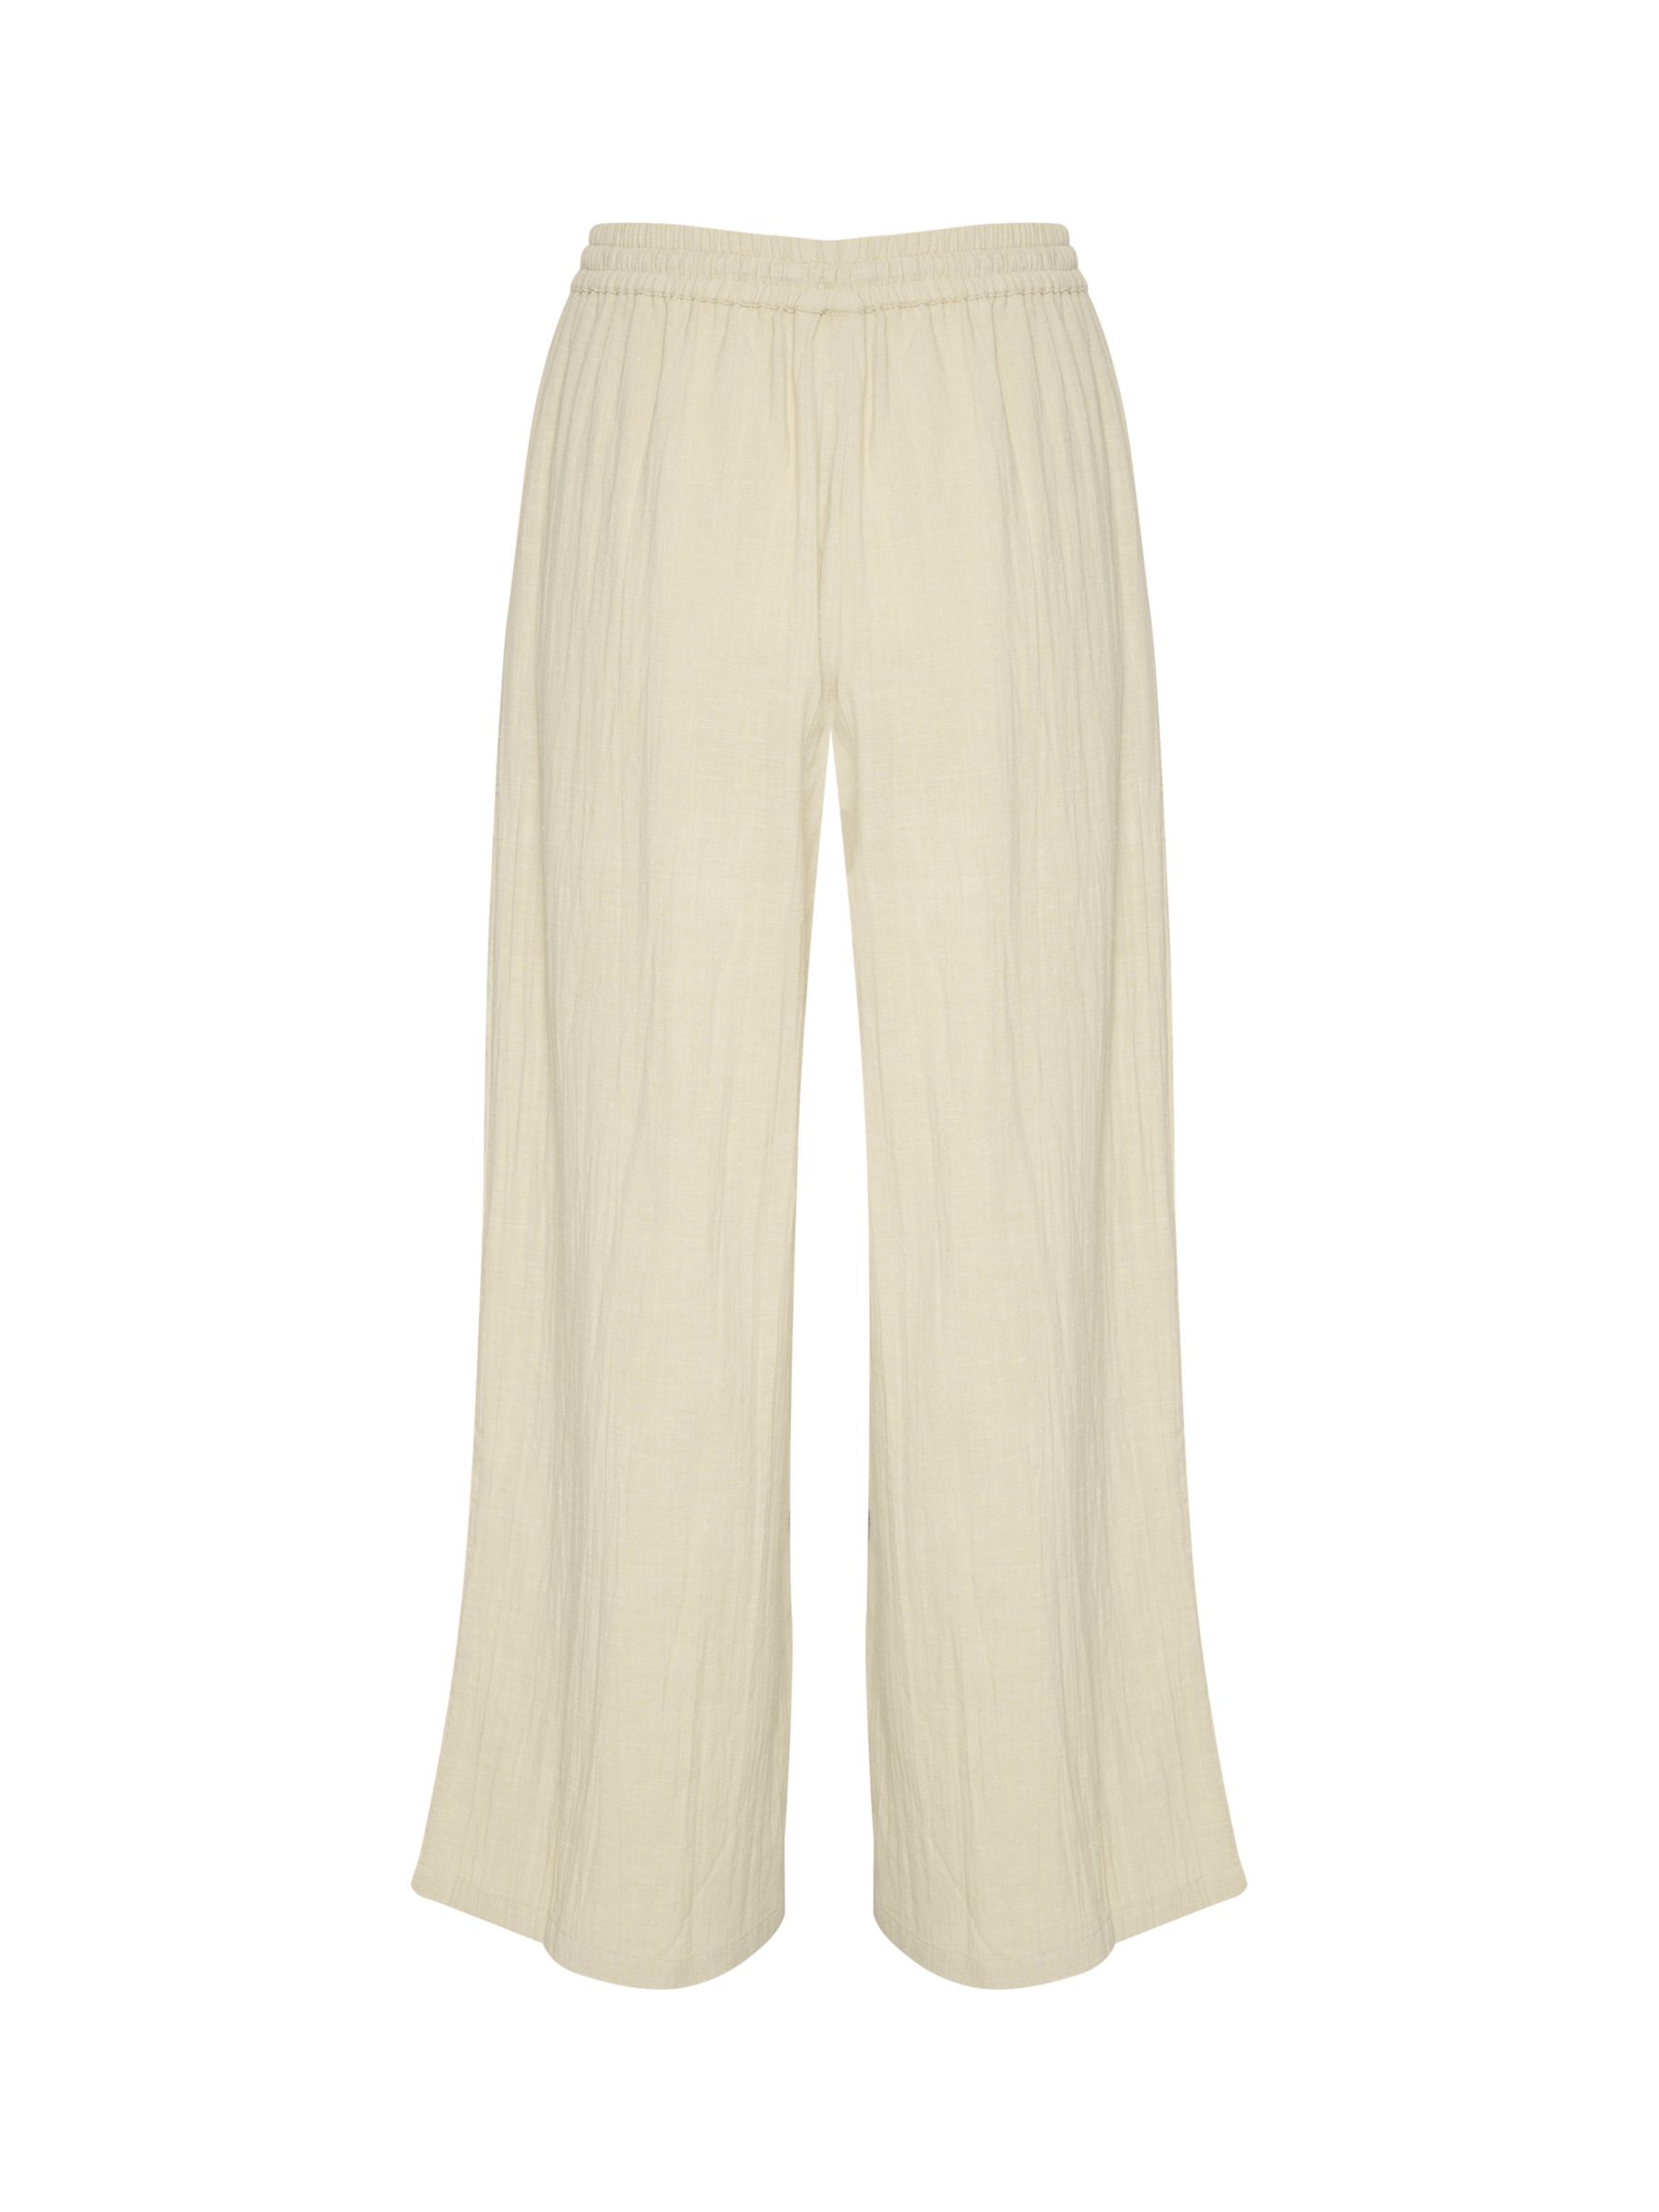 Buy KAFFE Emily Wide Leg Culotte Trousers, Feather Grey Online at johnlewis.com